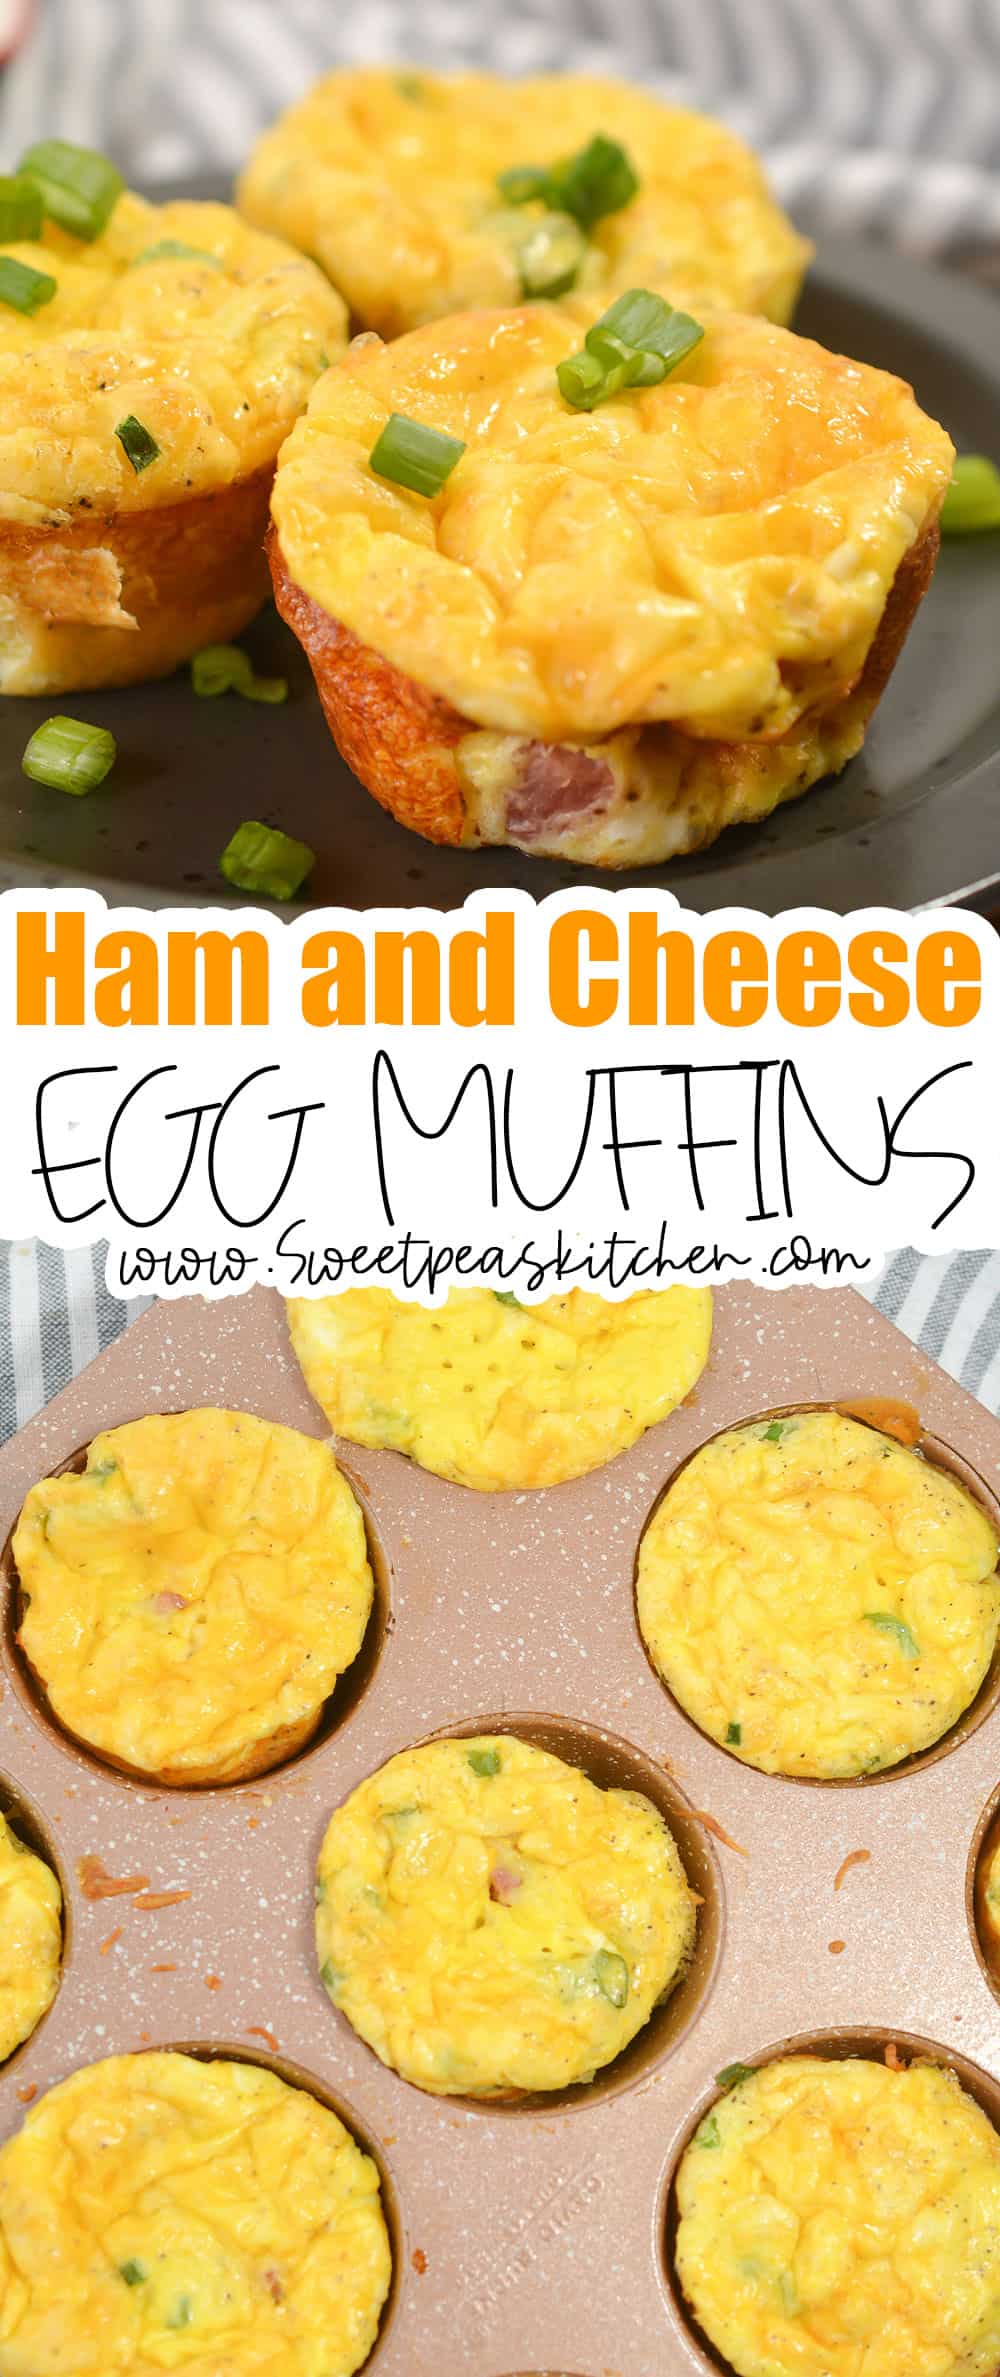 ham and cheese egg muffins pinterest